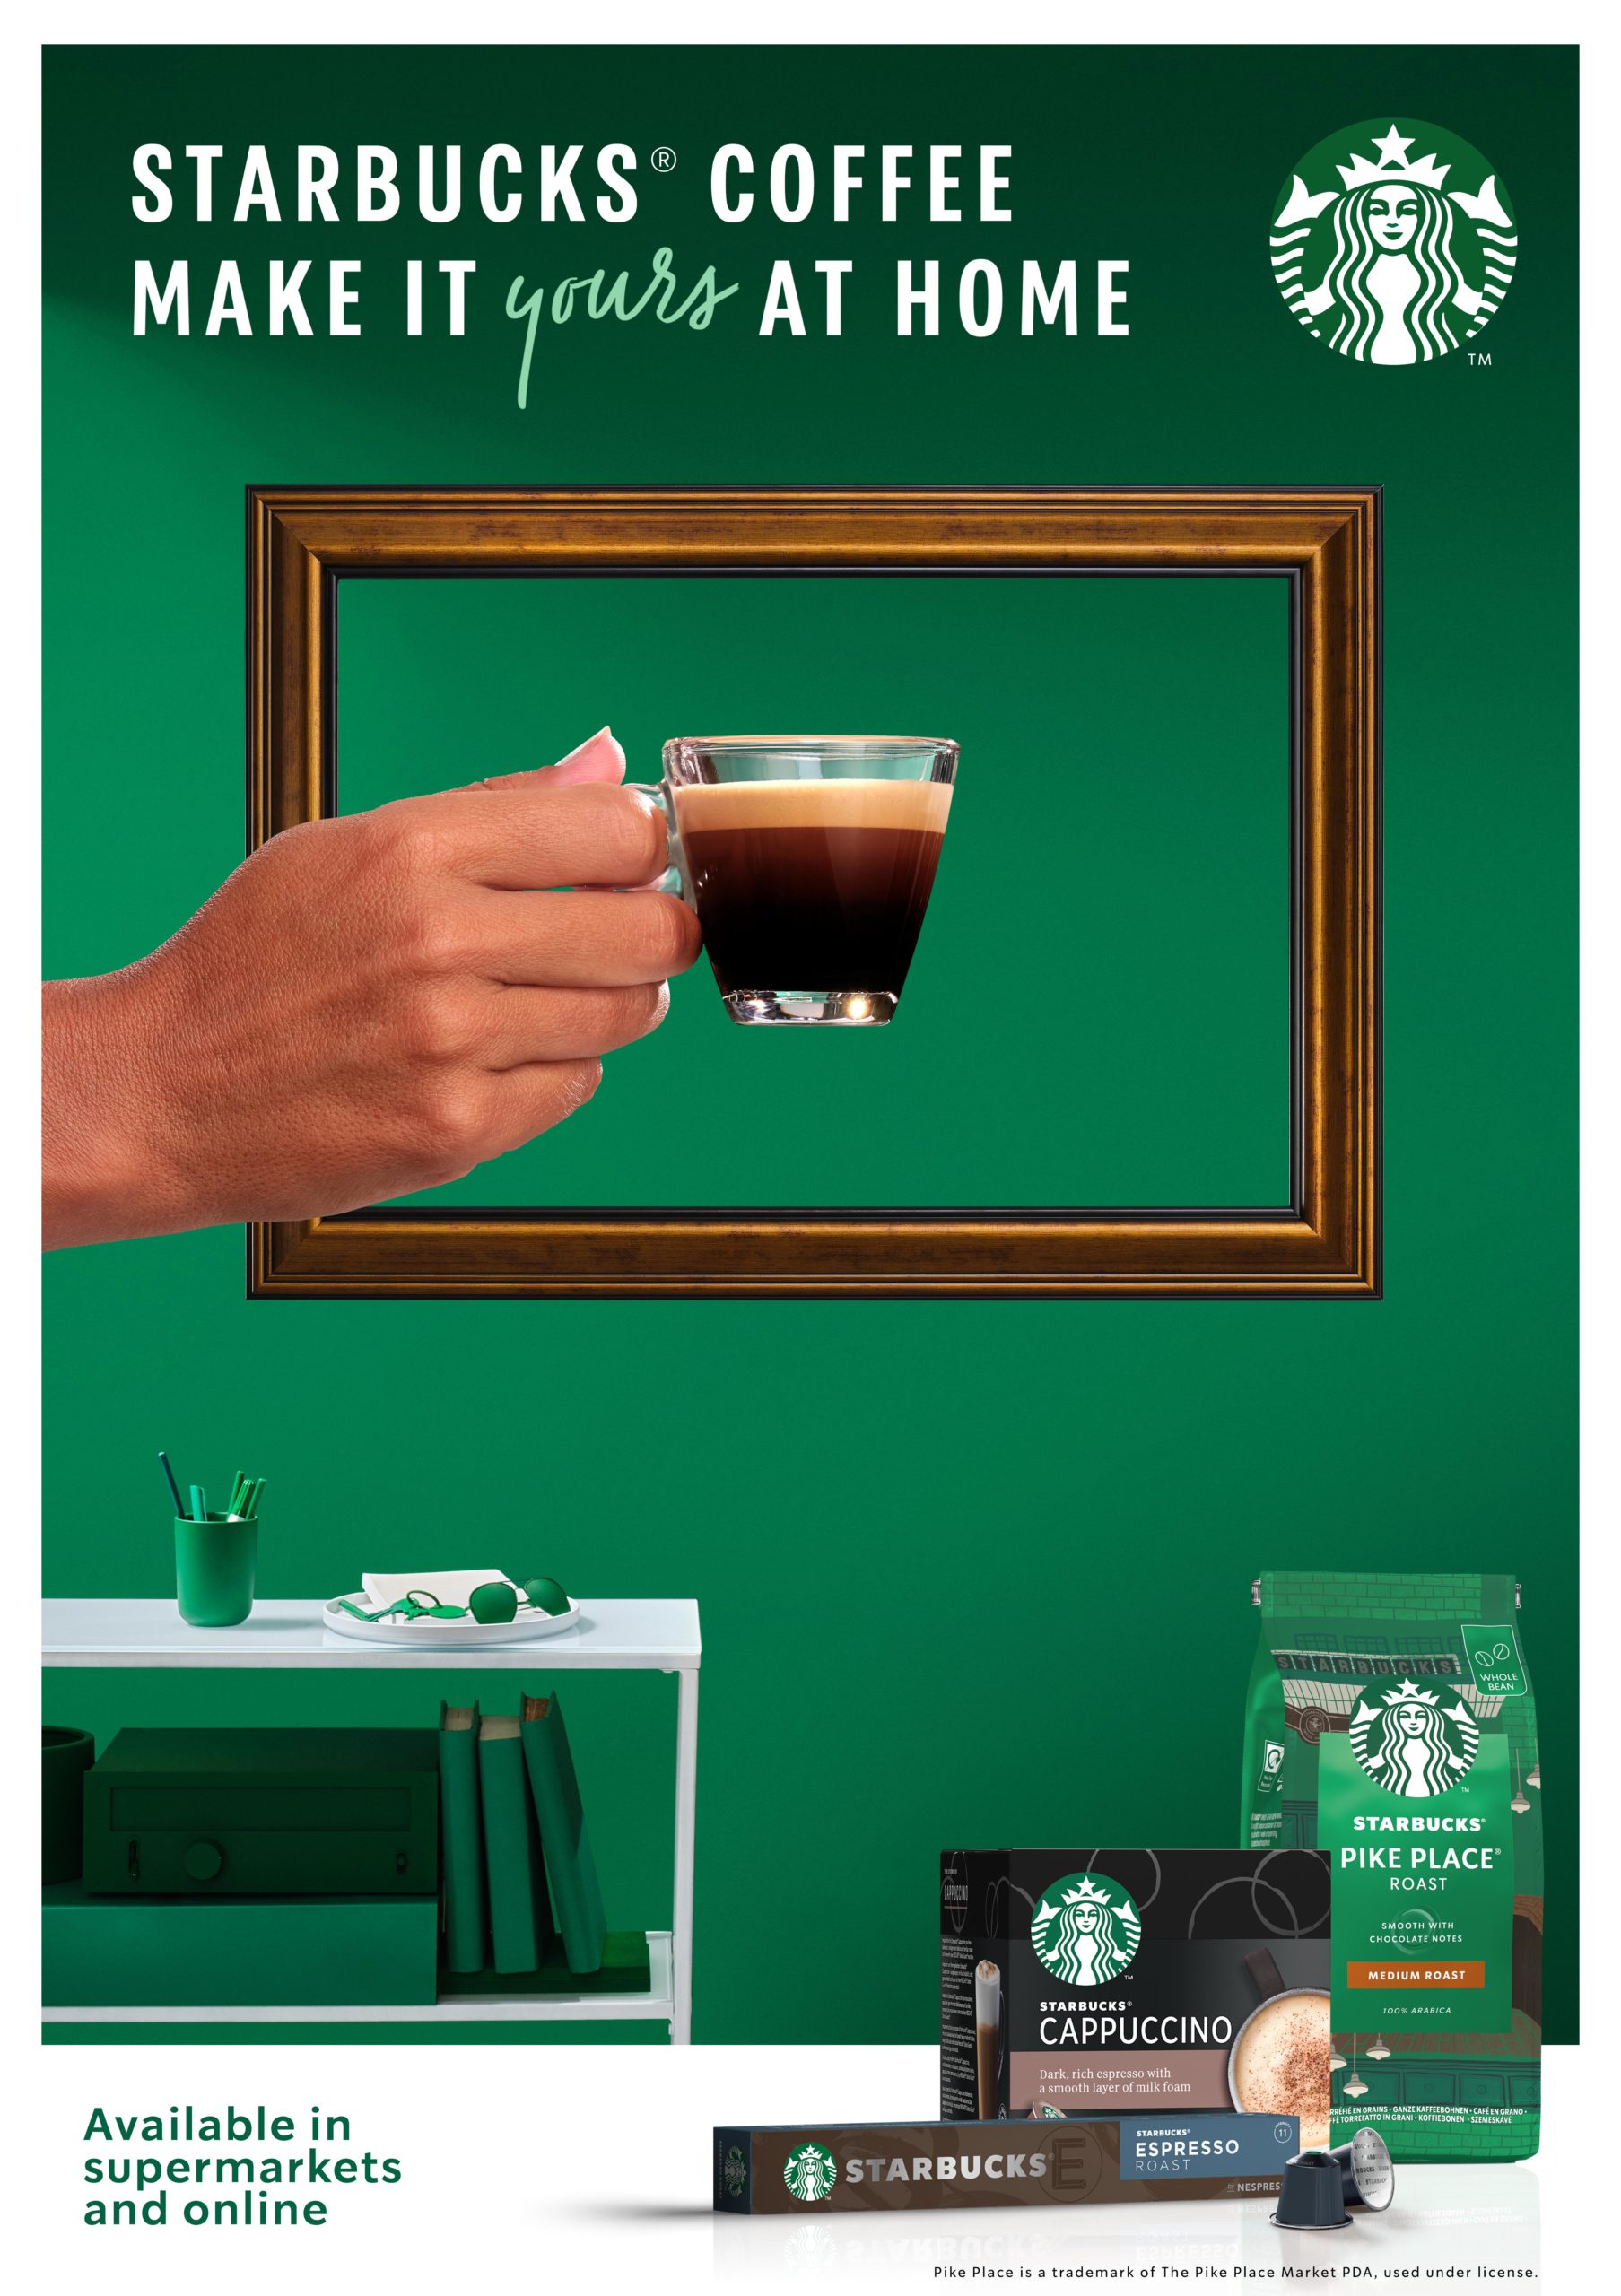 STARBUCKS Helps Coffee Lovers Make It Theirs At Home In New Global